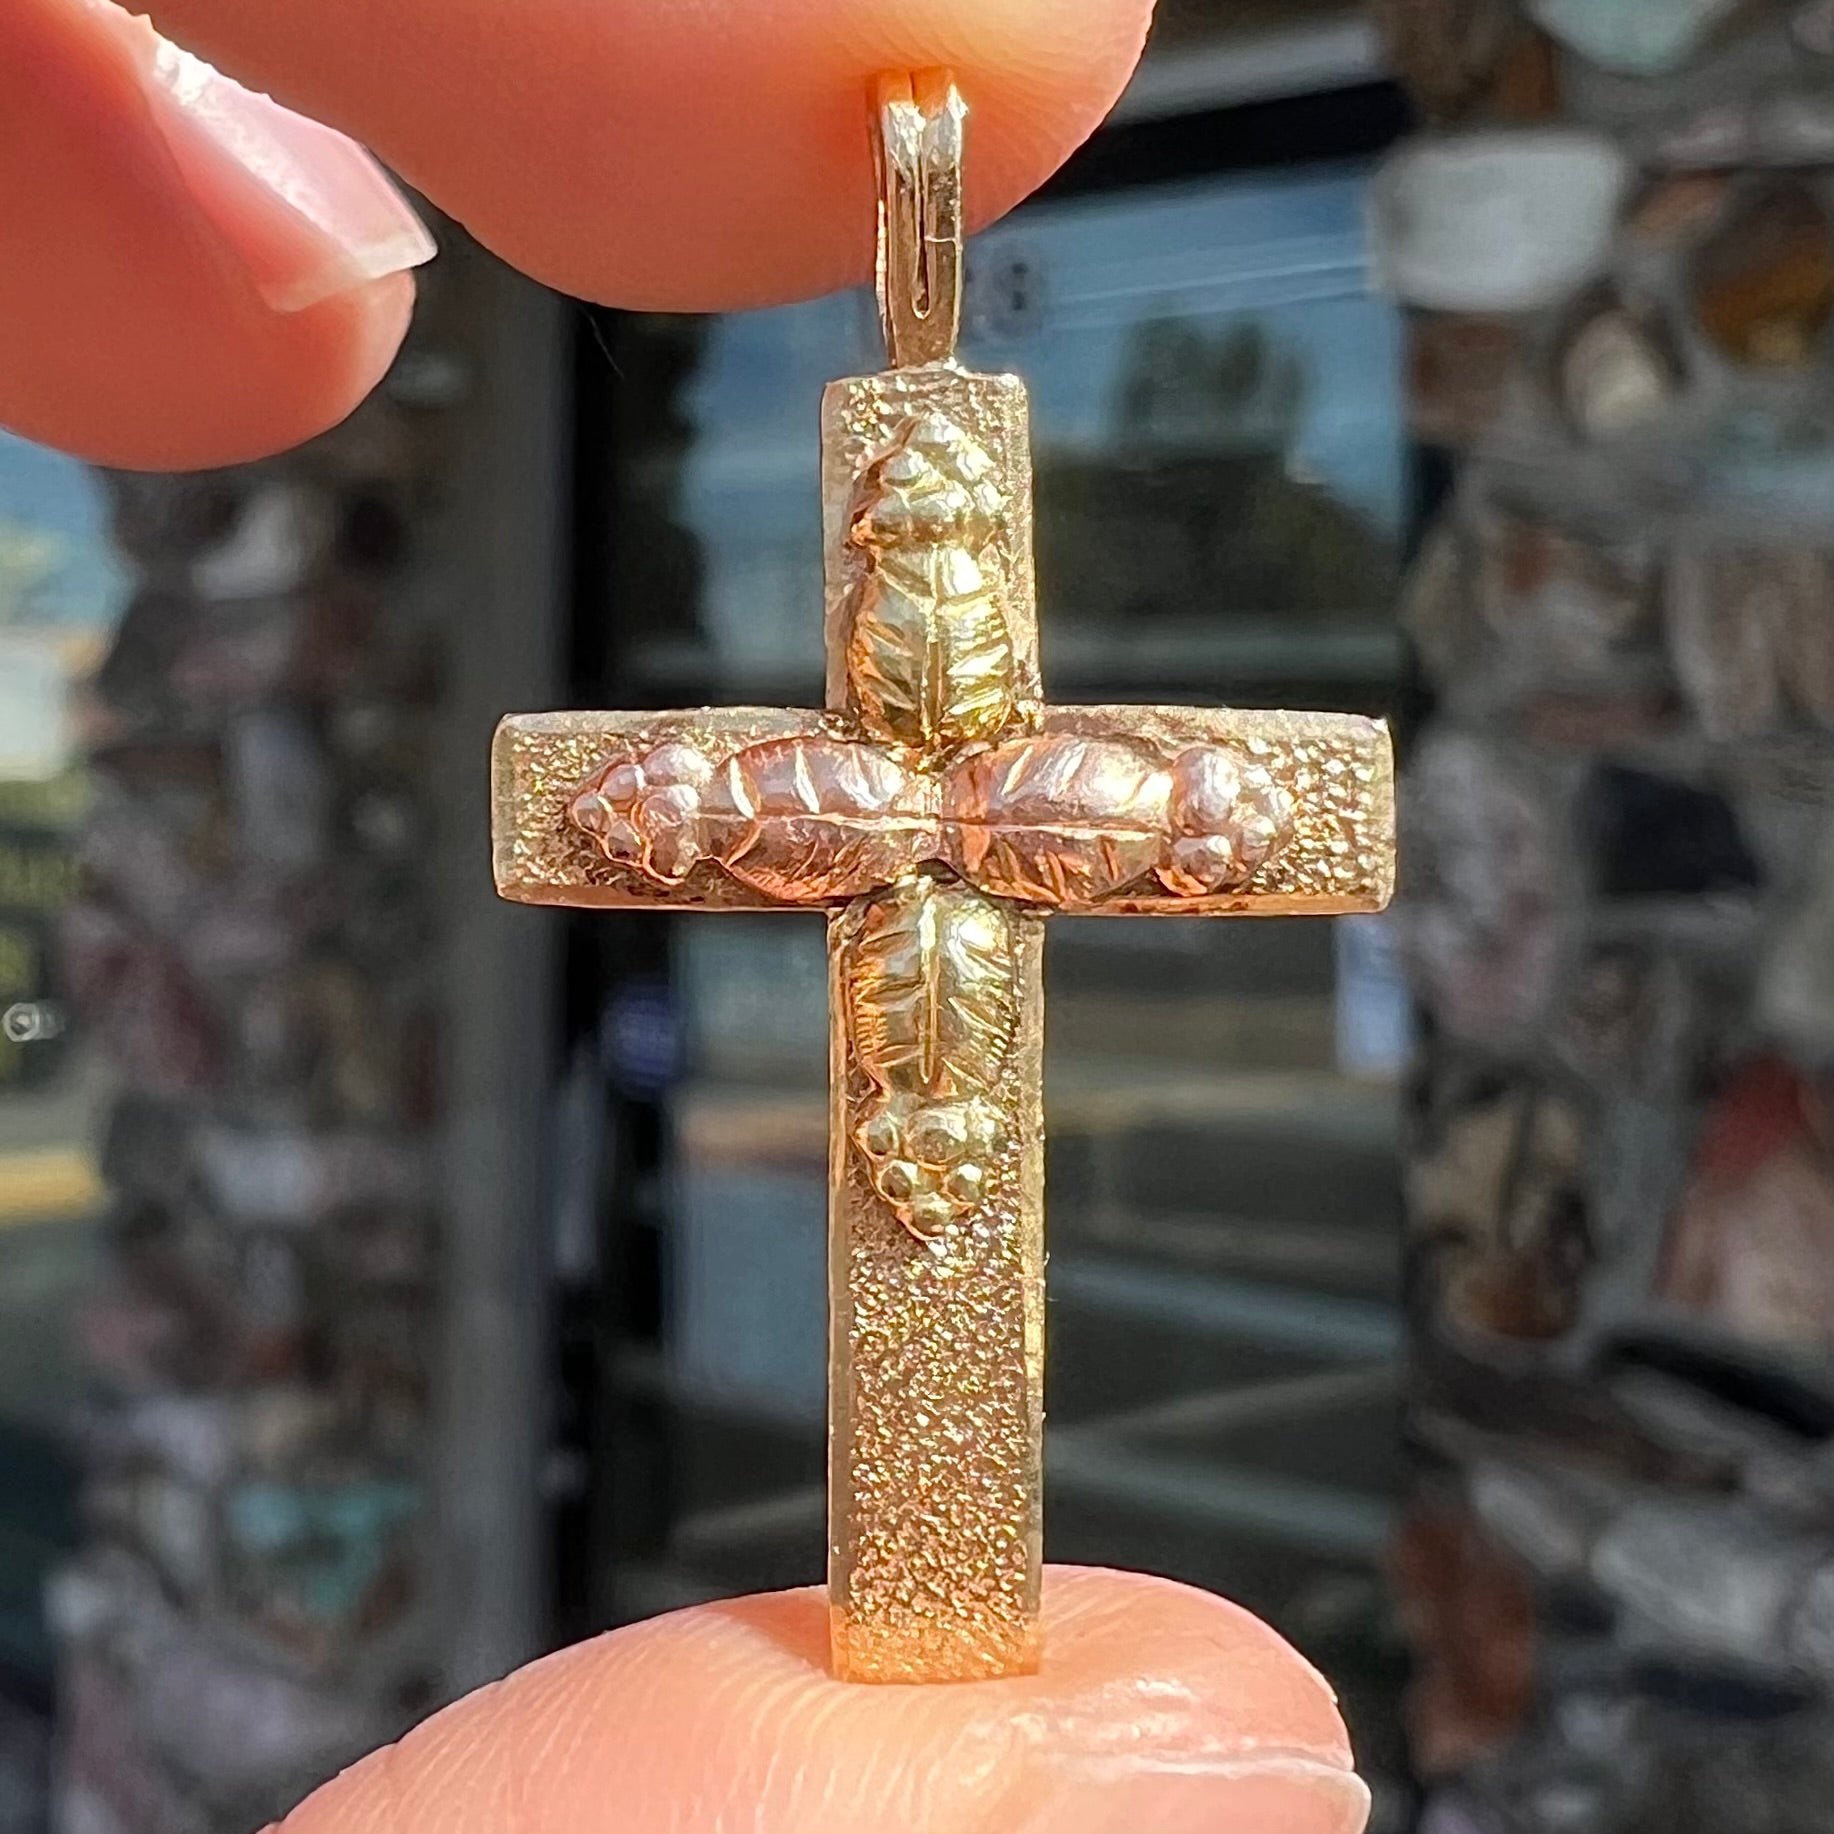 A cross made from yellow and rose gold Black Hills gold.  The cross features a leaf design.